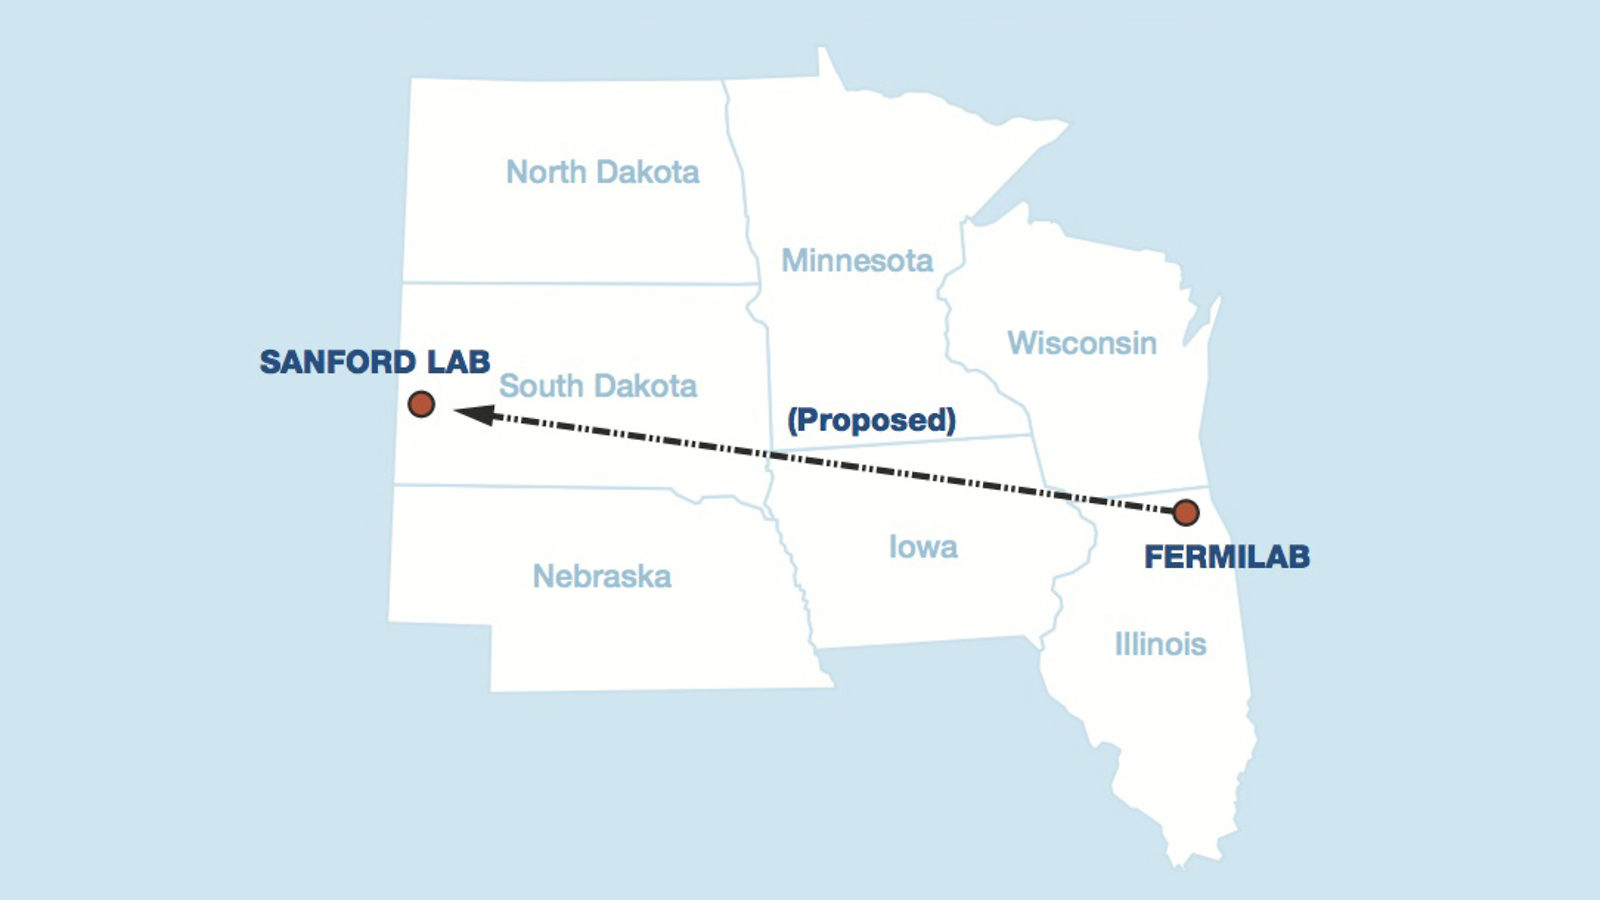 Illustration of the neutrino beam for the proposed LBNE experiment would travel through to a far detector in Lead, SD